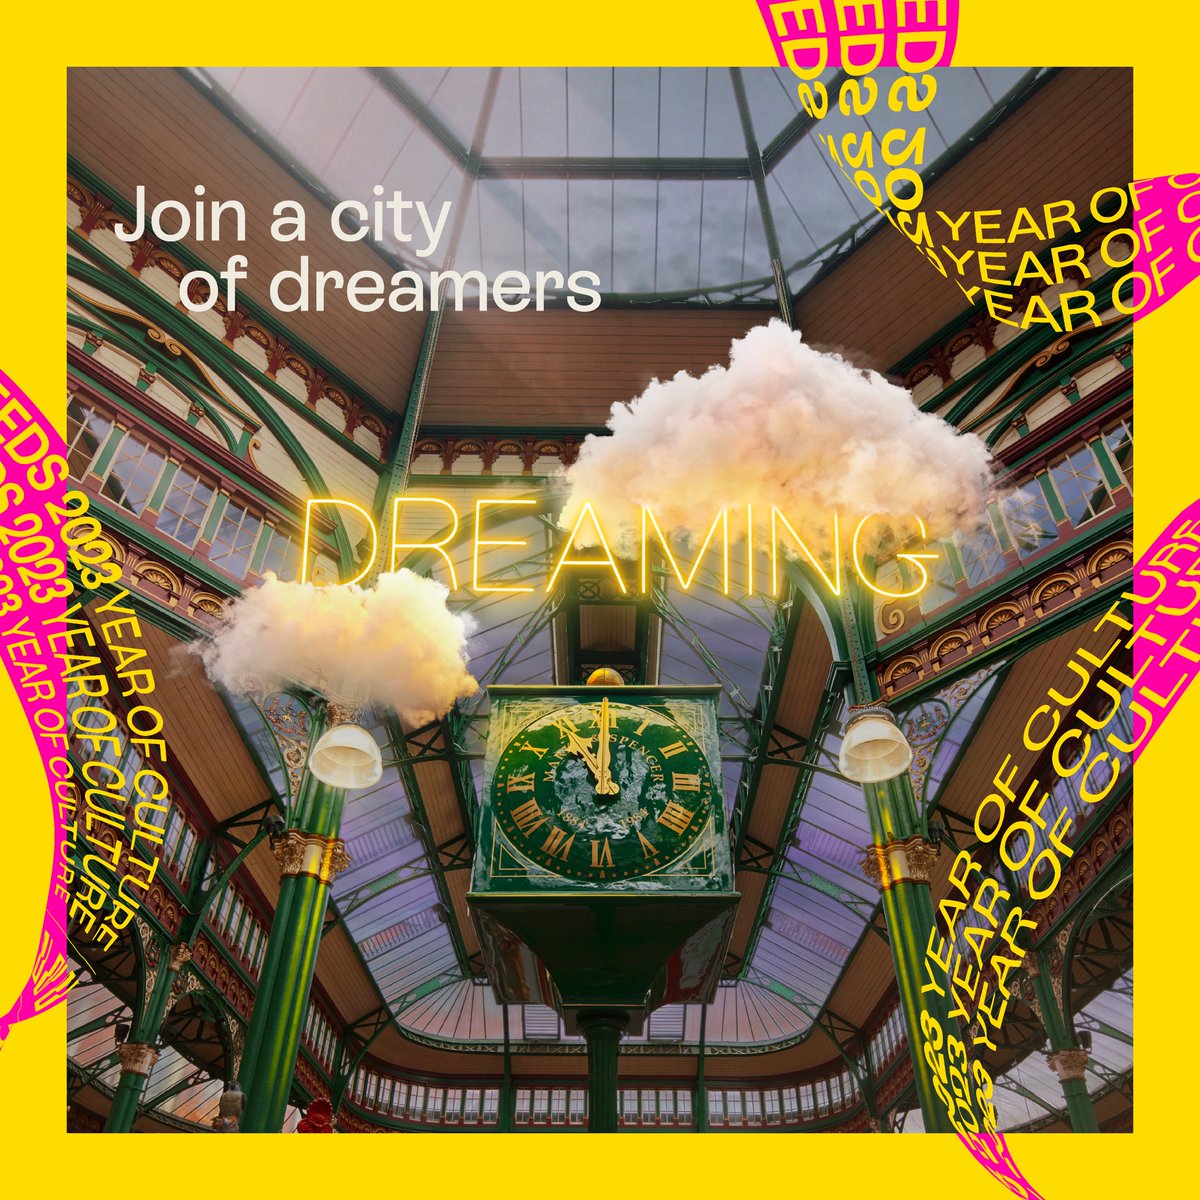 Announcing the final chapter of @leeds_2023 - Part Three: Dreaming. A place where daydreams are celebrated, and visions for the future are brought to life. Leeds, are you ready to dream September – December 2023? Join a city of dreamers: leeds2023.co.uk #LEEDS2023